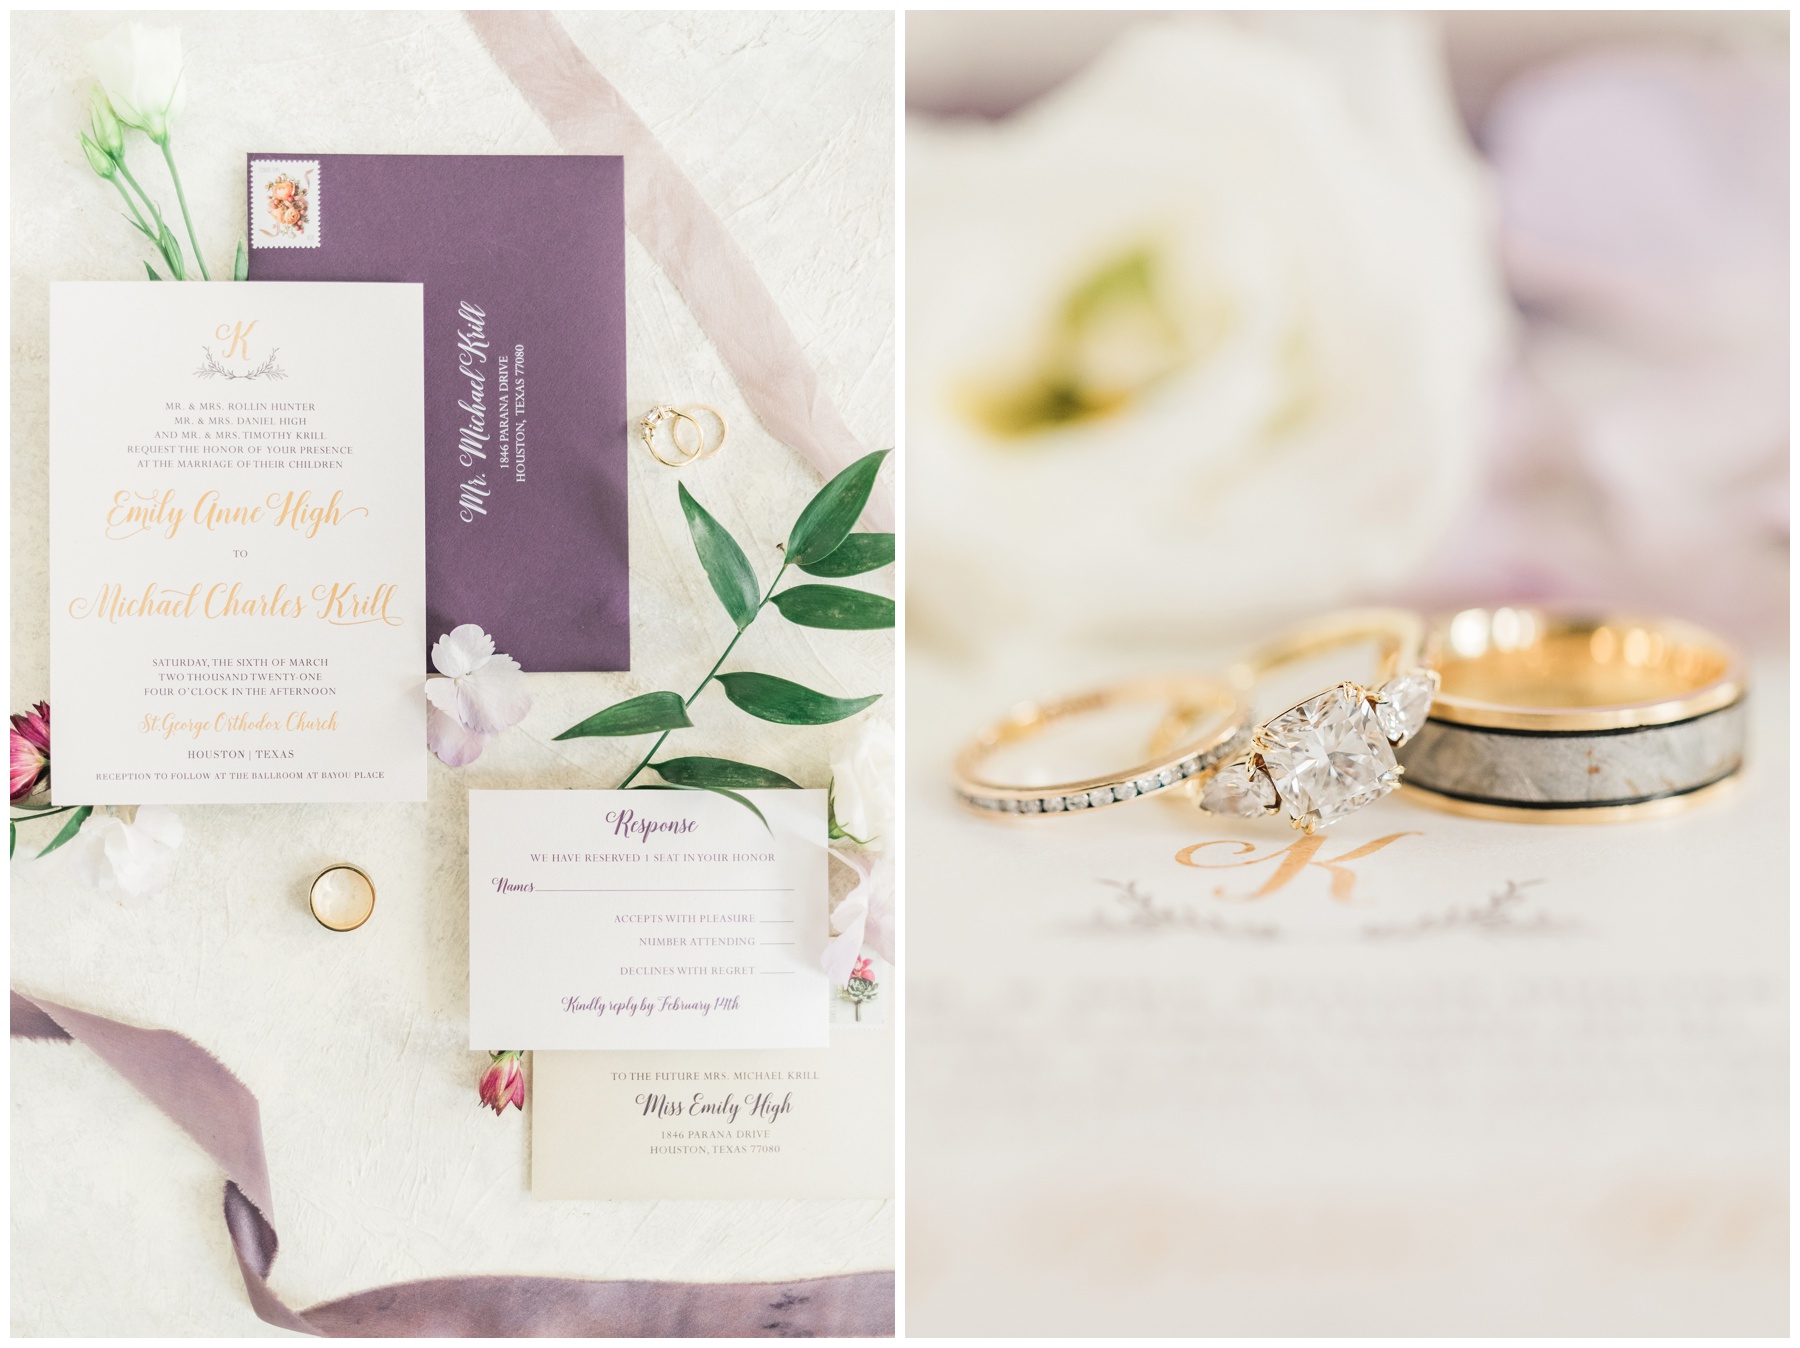 Close-up of a couple's engagement ring and wedding bands on top of their invitation suite